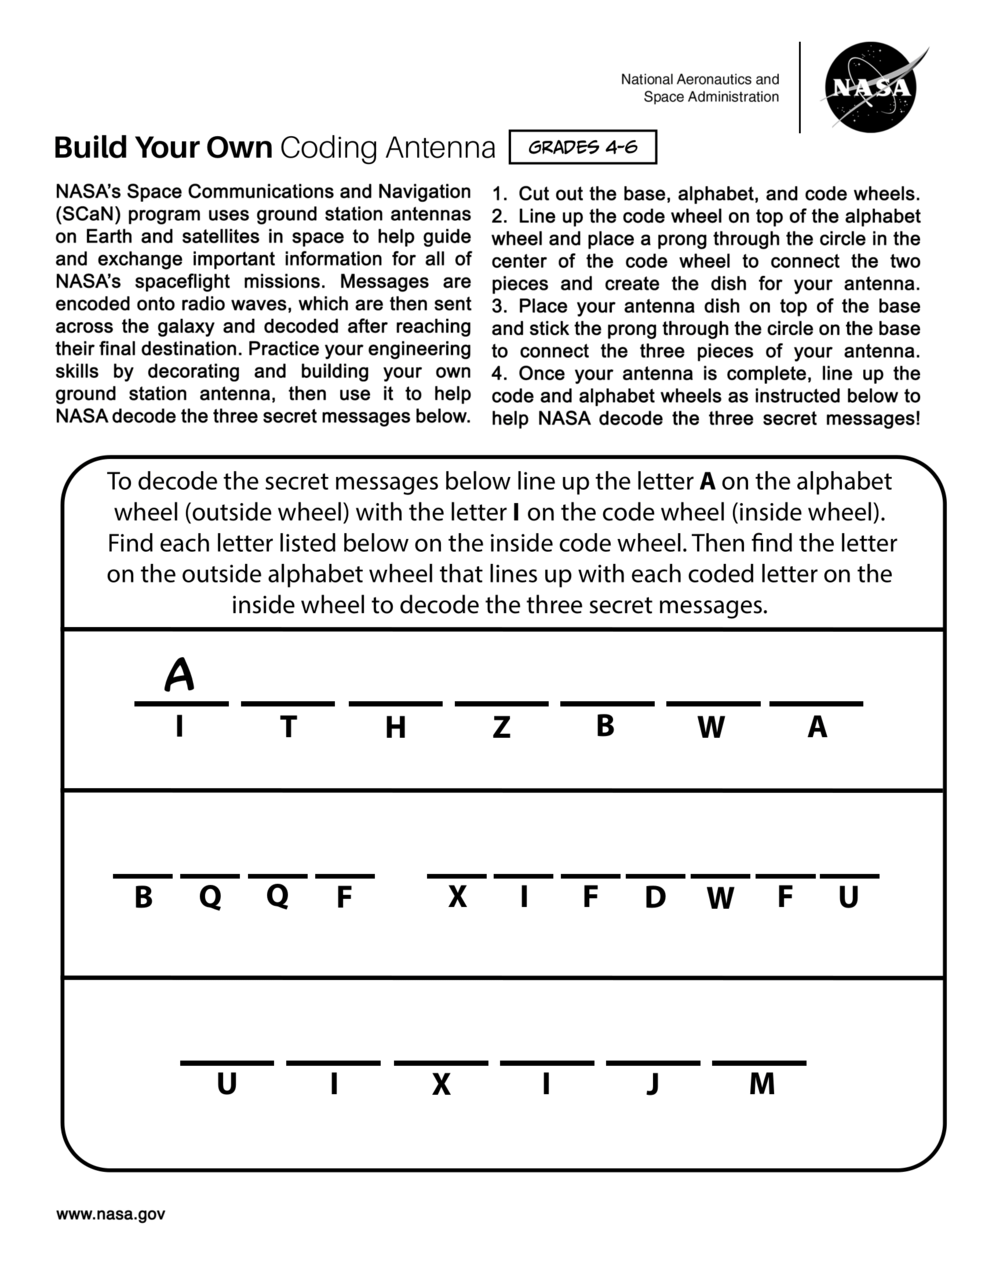 Front page of the Build Your Own Coding Activity for grades four through six. On the the top half of the page is block of text with directions for how to complete the activity. The bottom half of the page is part of the activity.